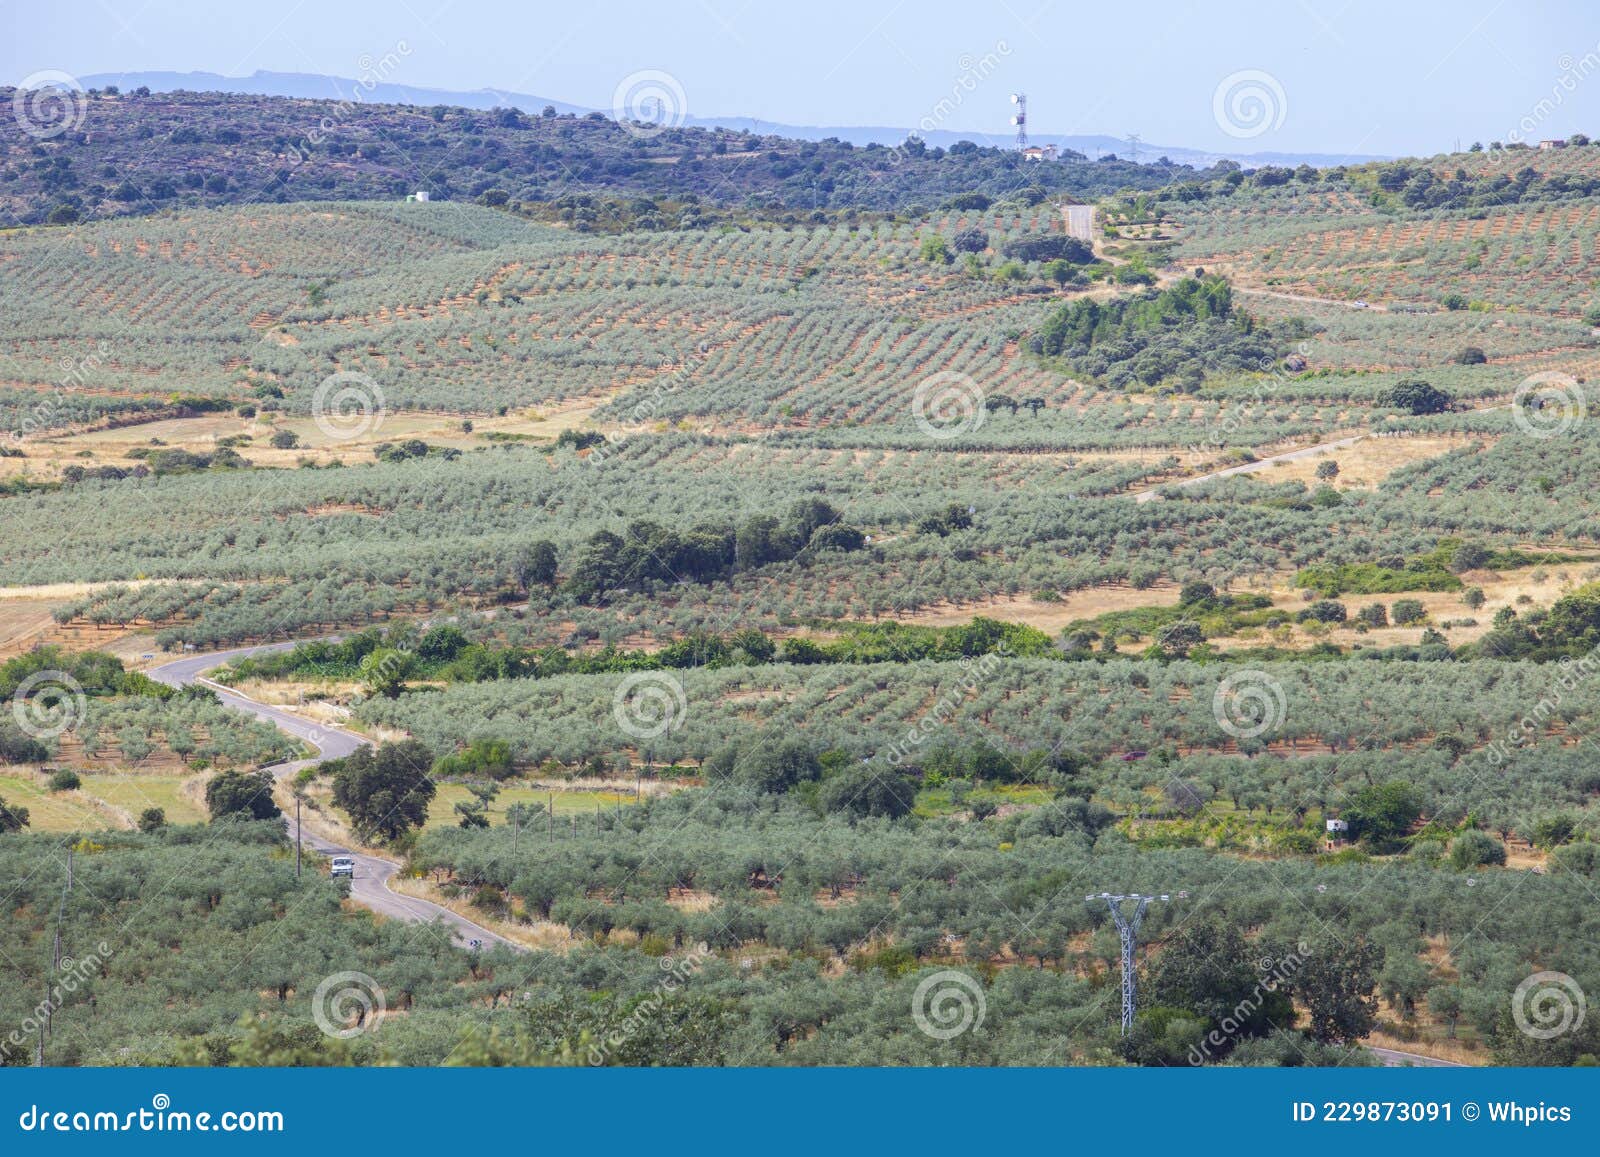 local road cc-13.6 crossing aceituna olive tree fields, extremadura, spain